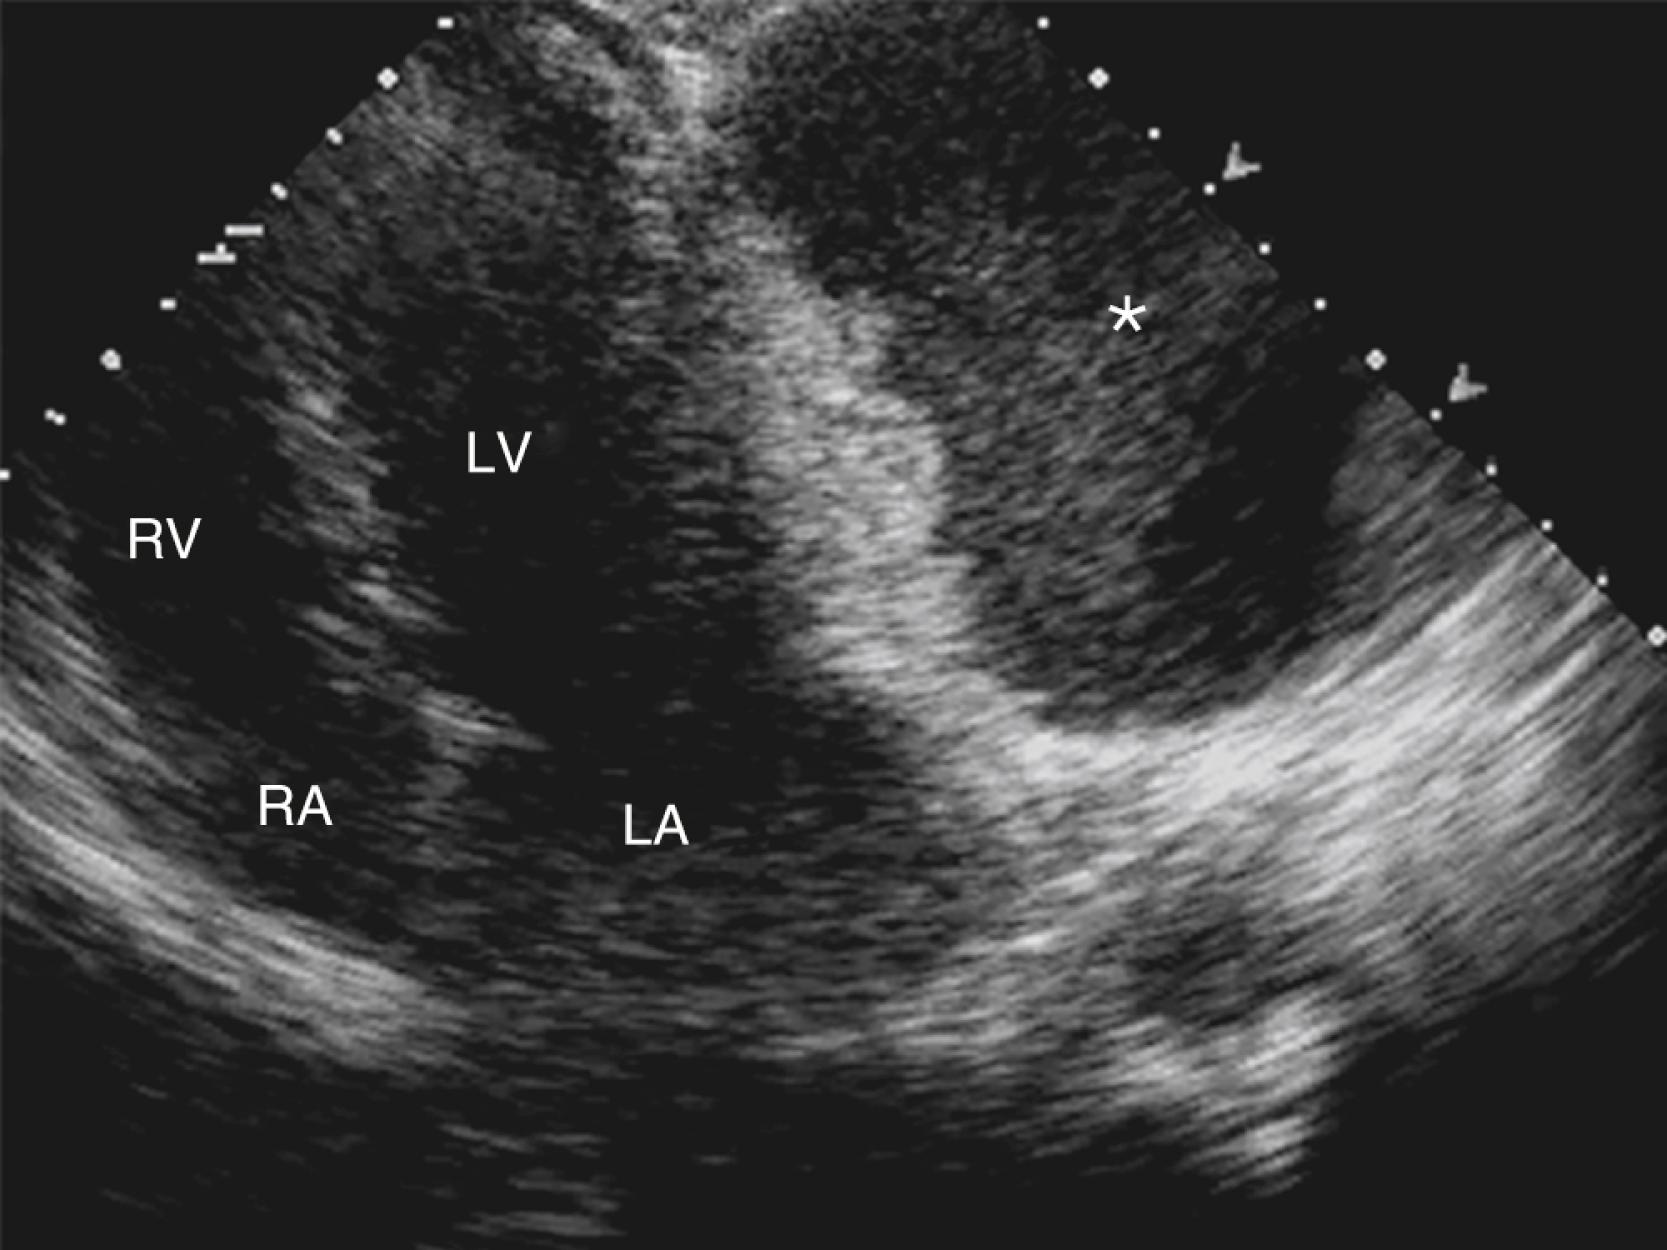 Figure 124.2, Apical four-chamber view demonstrating a giant pericardial cyst (asterisk) adjacent to the left ventricle (LV) and left atrium (LA). RA, Right atrium; RV, right ventricle. (See accompanying Video 124.2 .)